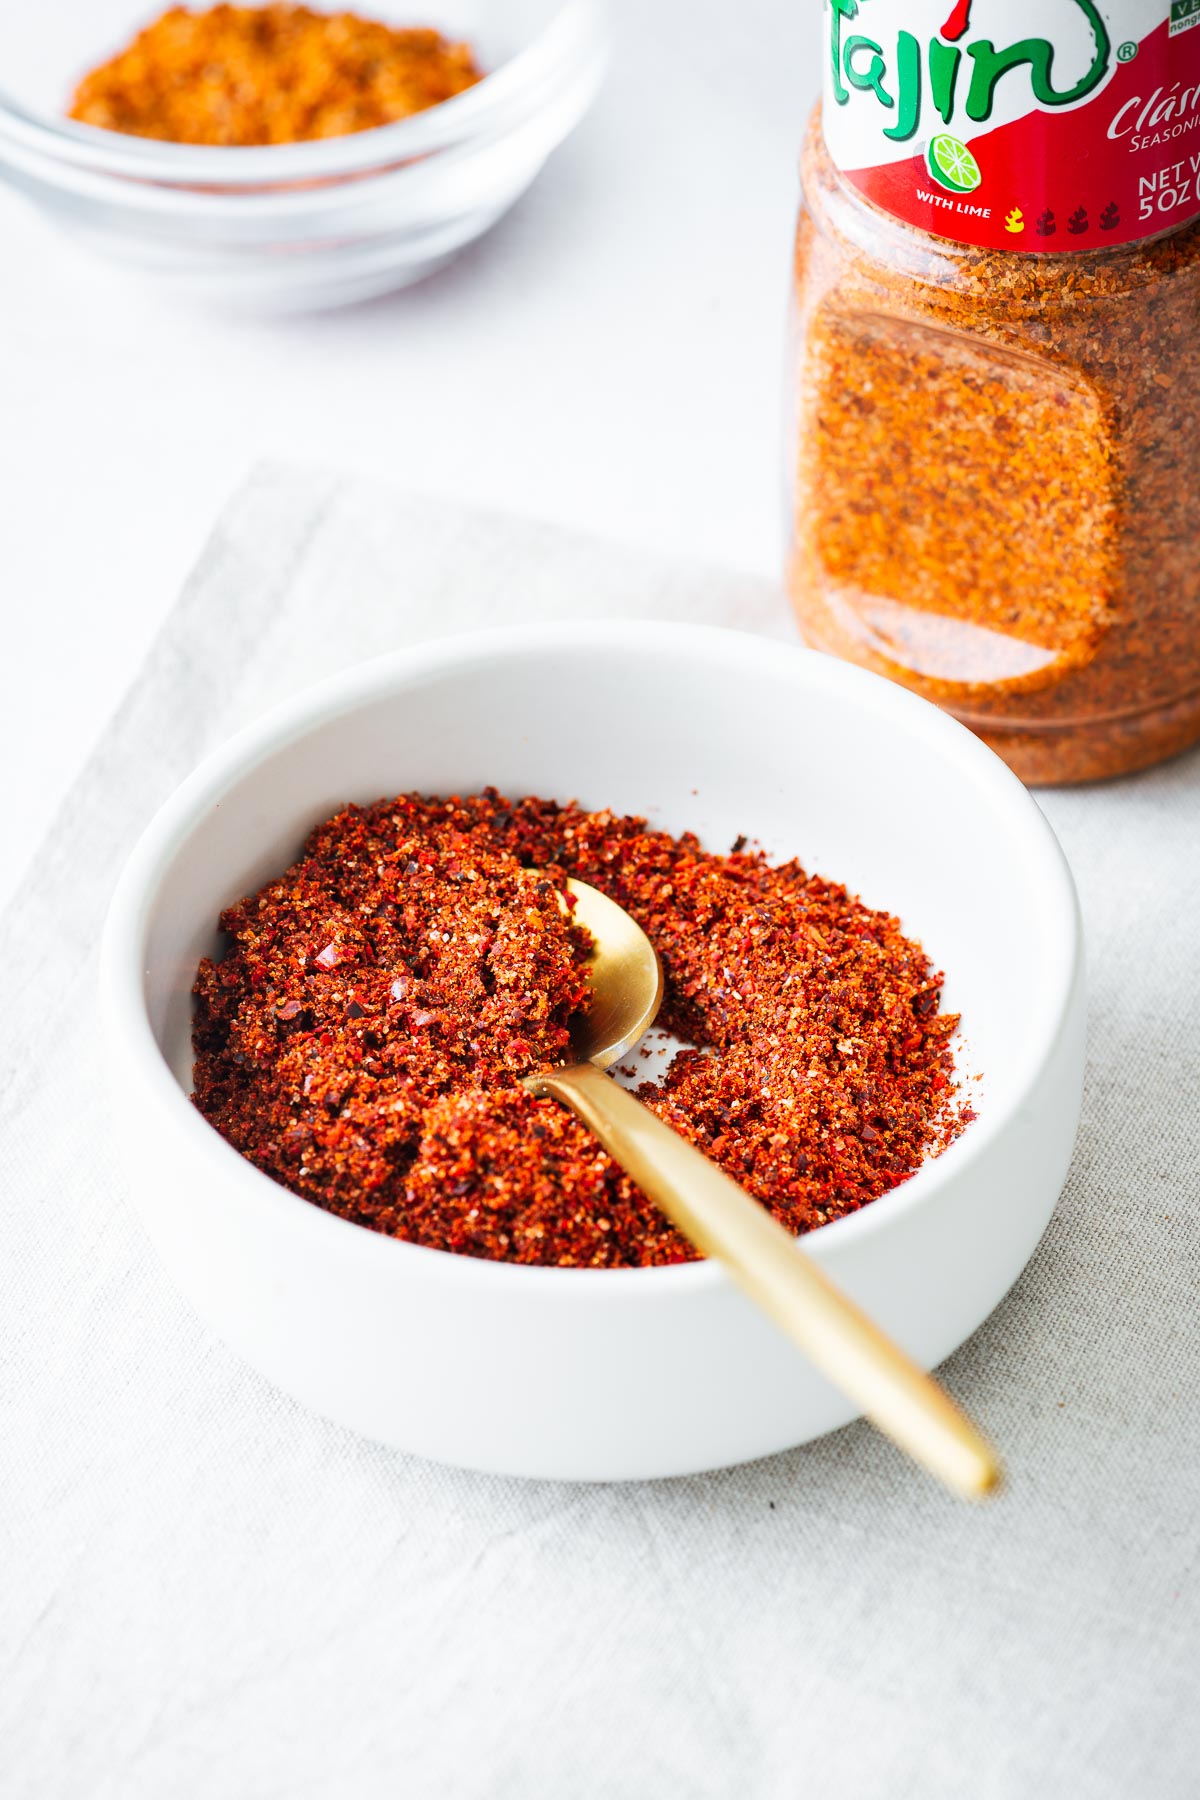 Close-up of a homemade tajin seasoning substitute with a bottle of Tajín Clásico Seasoning in the background.